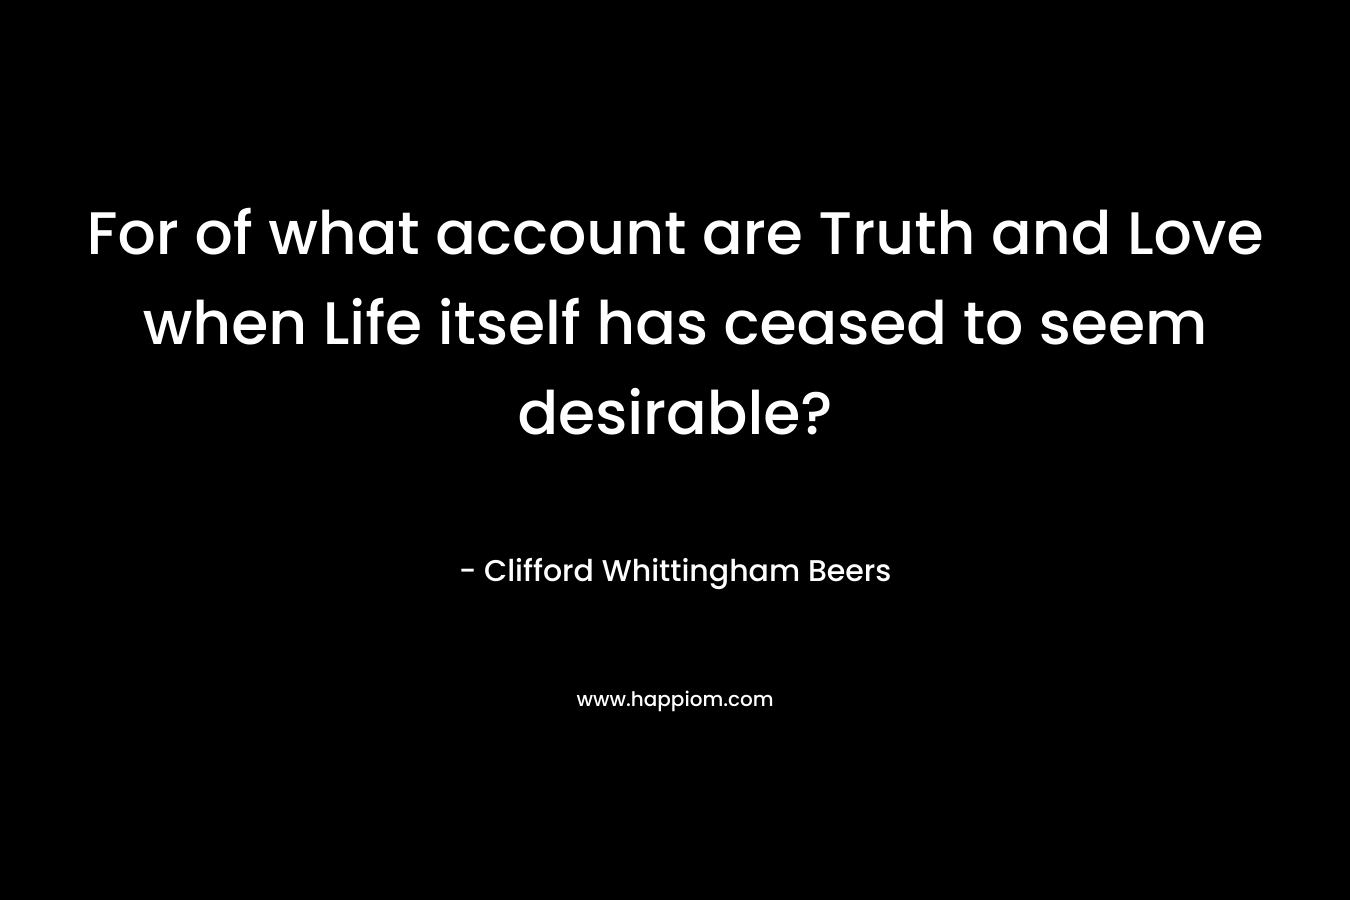 For of what account are Truth and Love when Life itself has ceased to seem desirable?